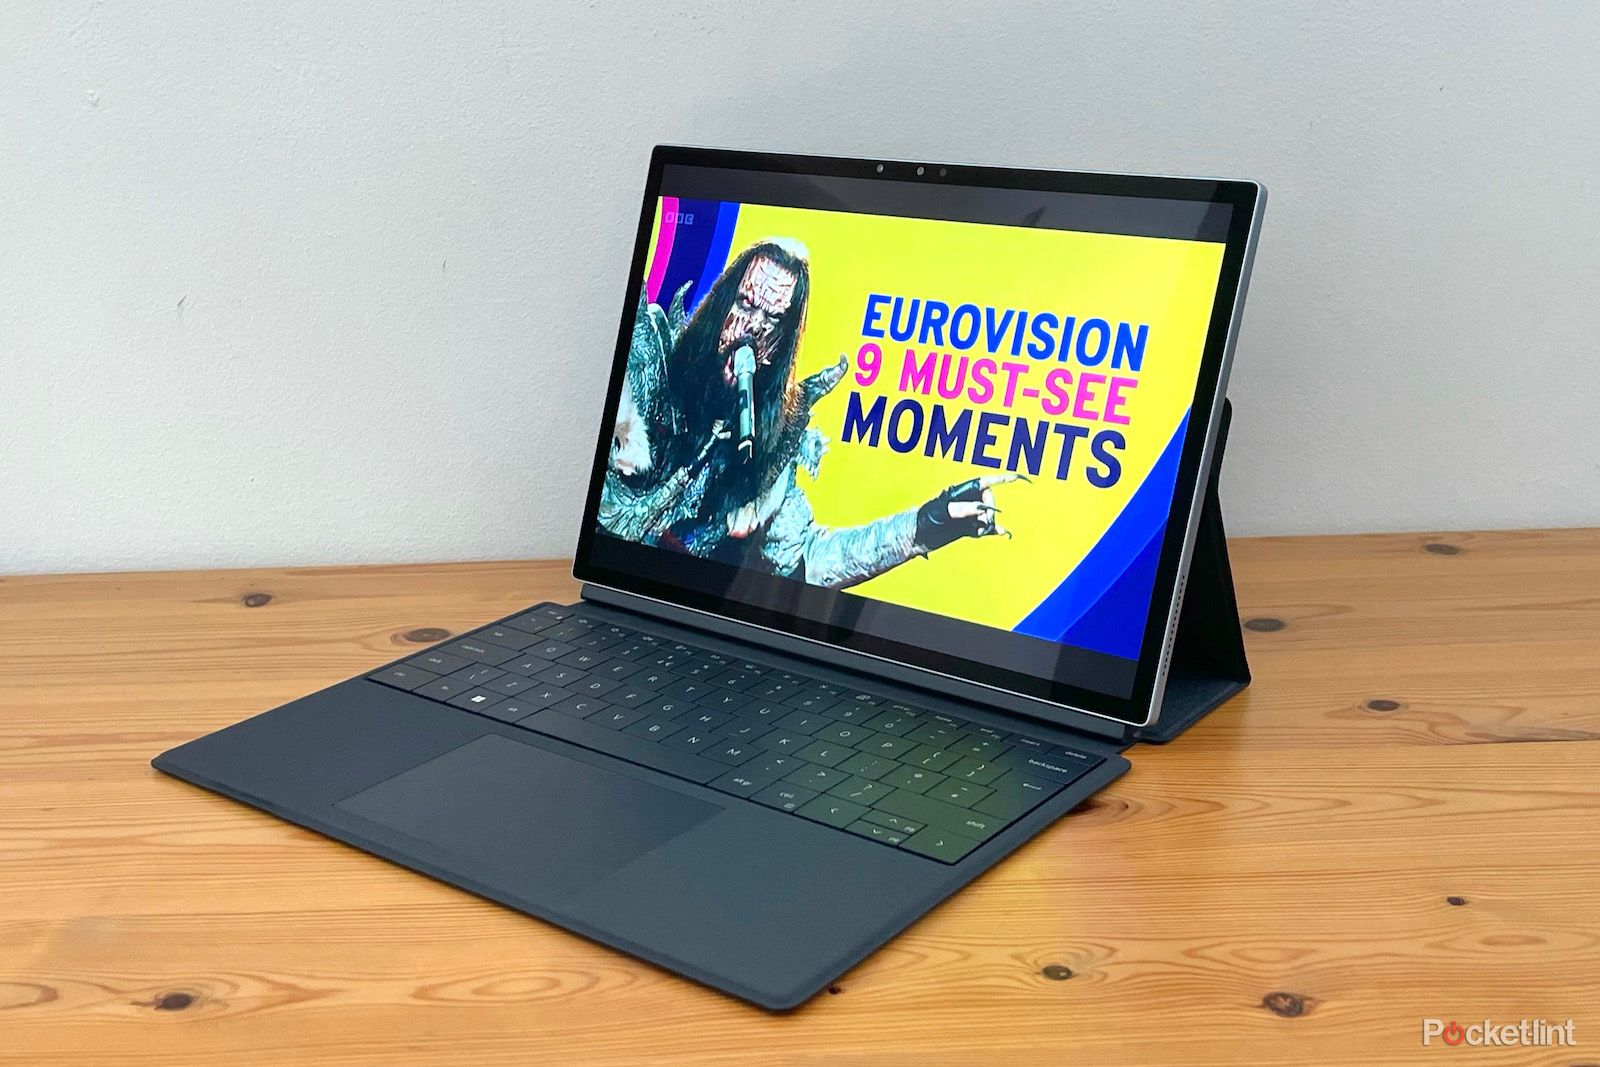 Dell XPS 13 2-in-1 review: Taking the fight to the Surface Pro